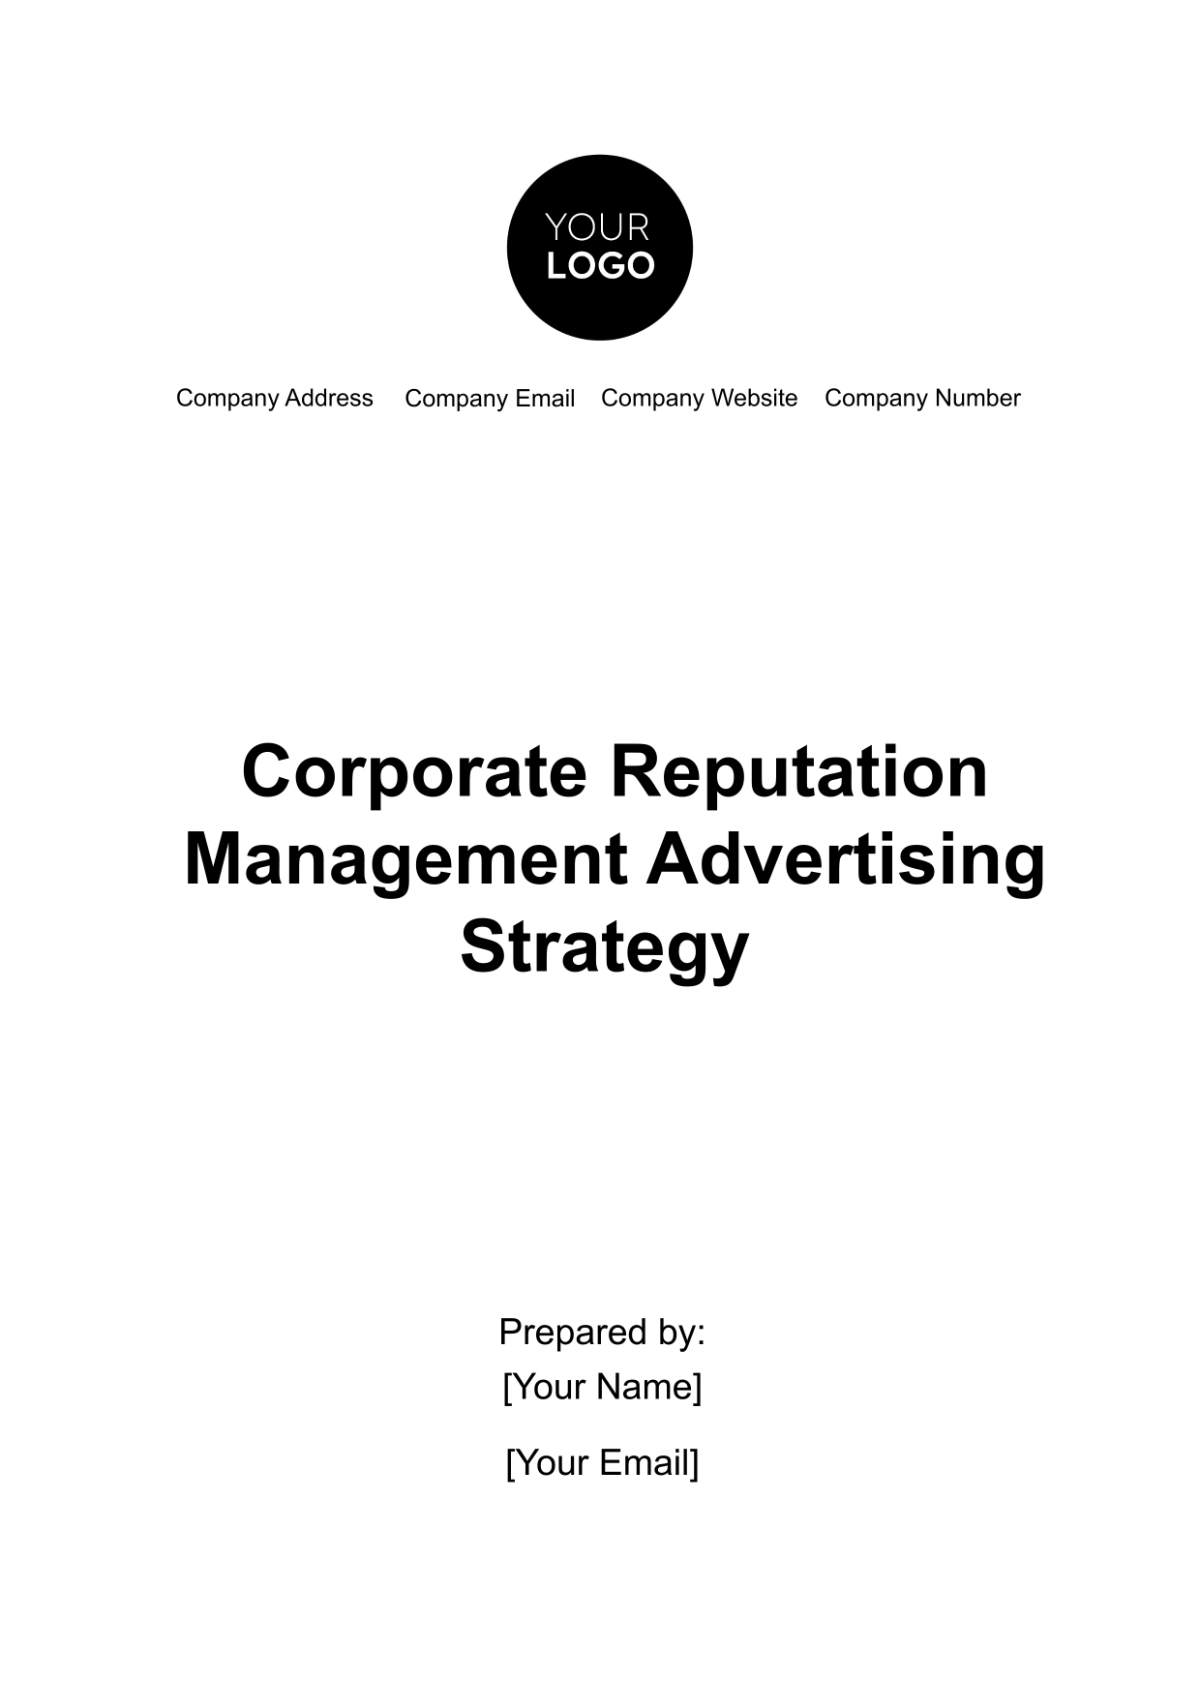 Corporate Reputation Management Advertising Strategy Template